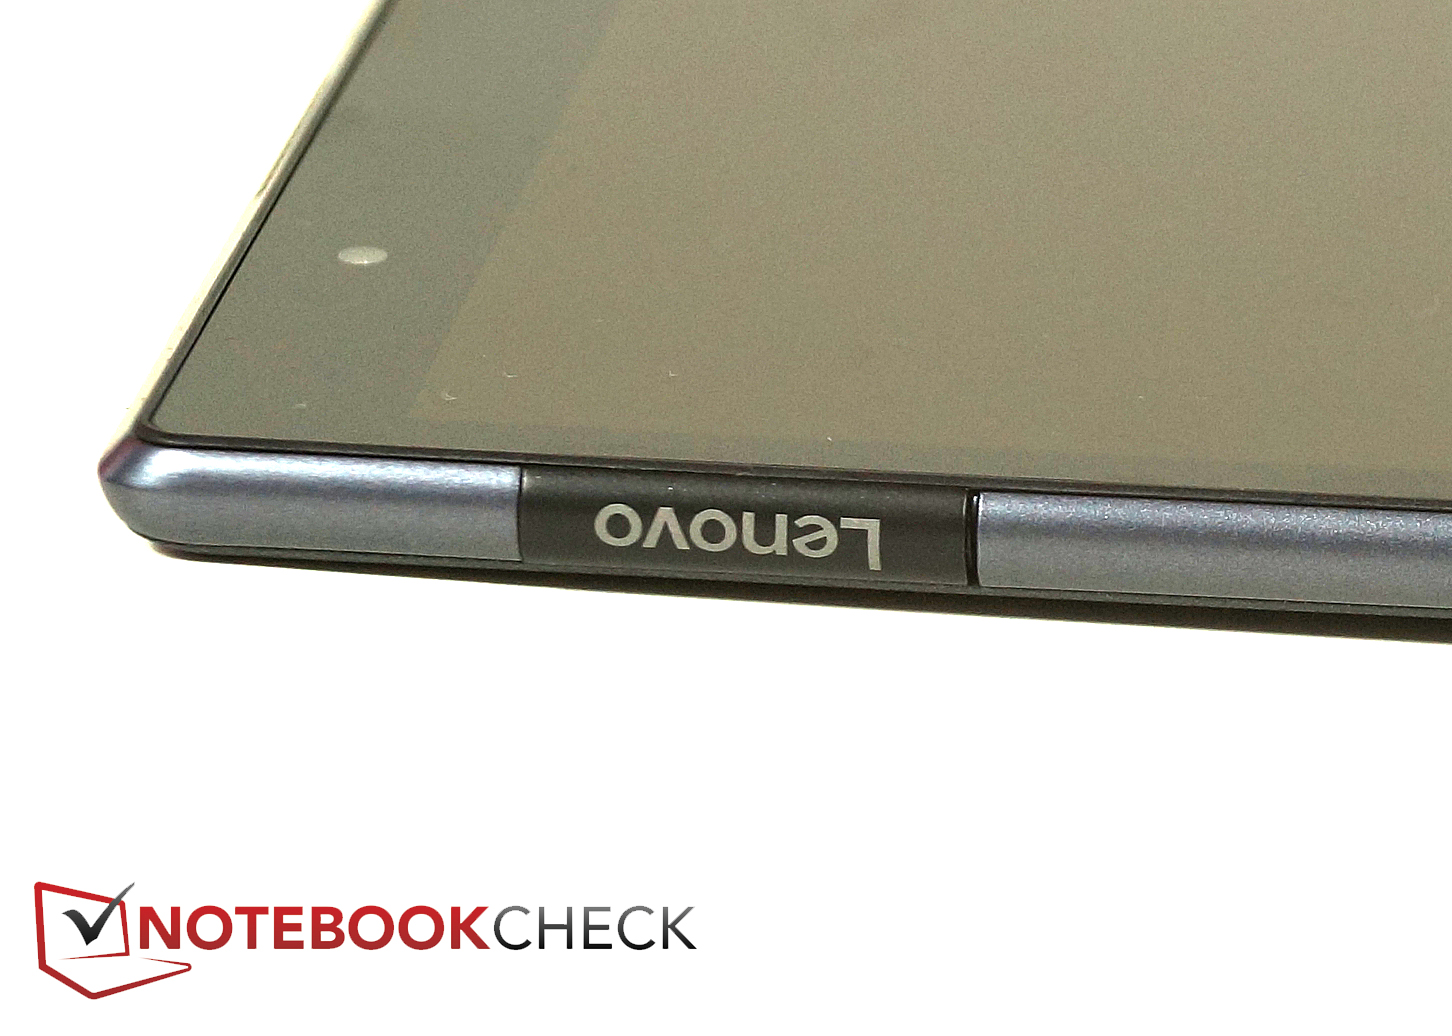 Lenovo Tab 4 8 Tablet Review - NotebookCheck.net Reviews